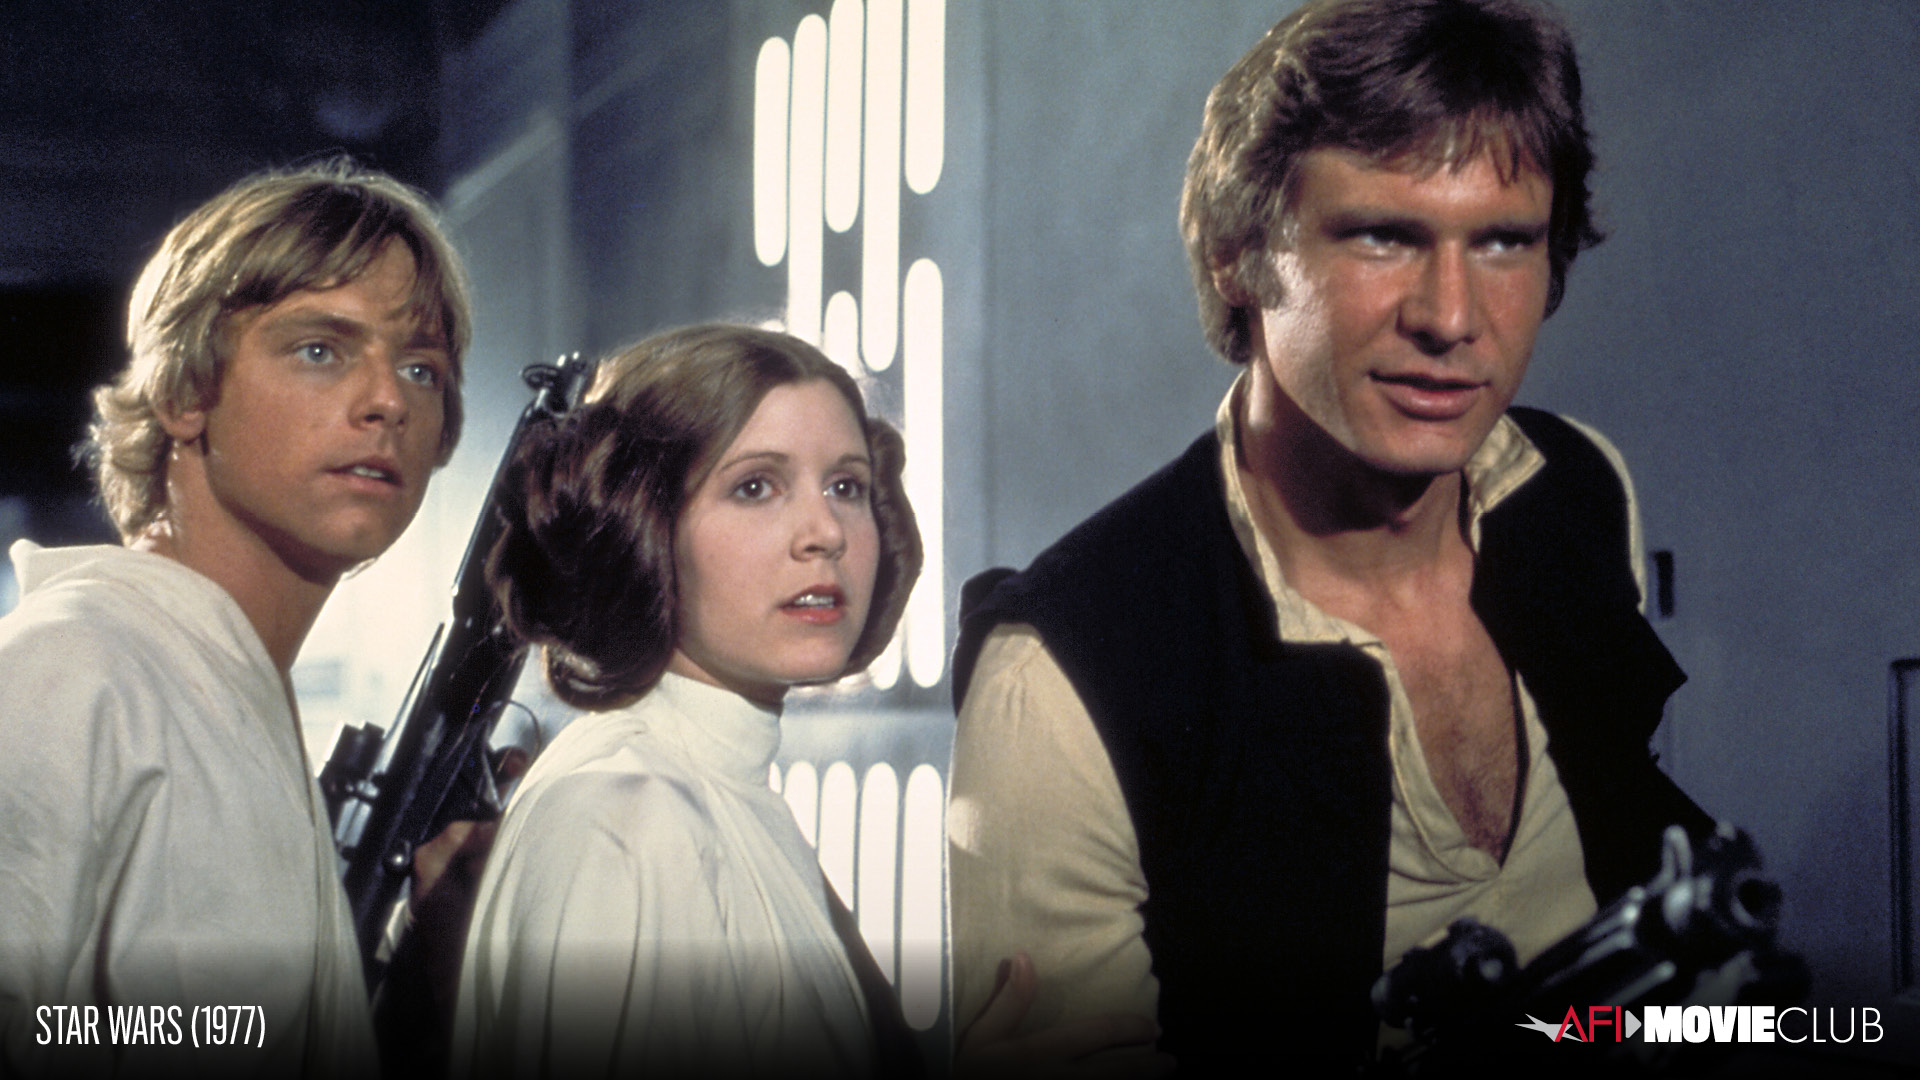 Star Wars Film Still - Harrison Ford, Carrie Fisher, and Mark Hamill